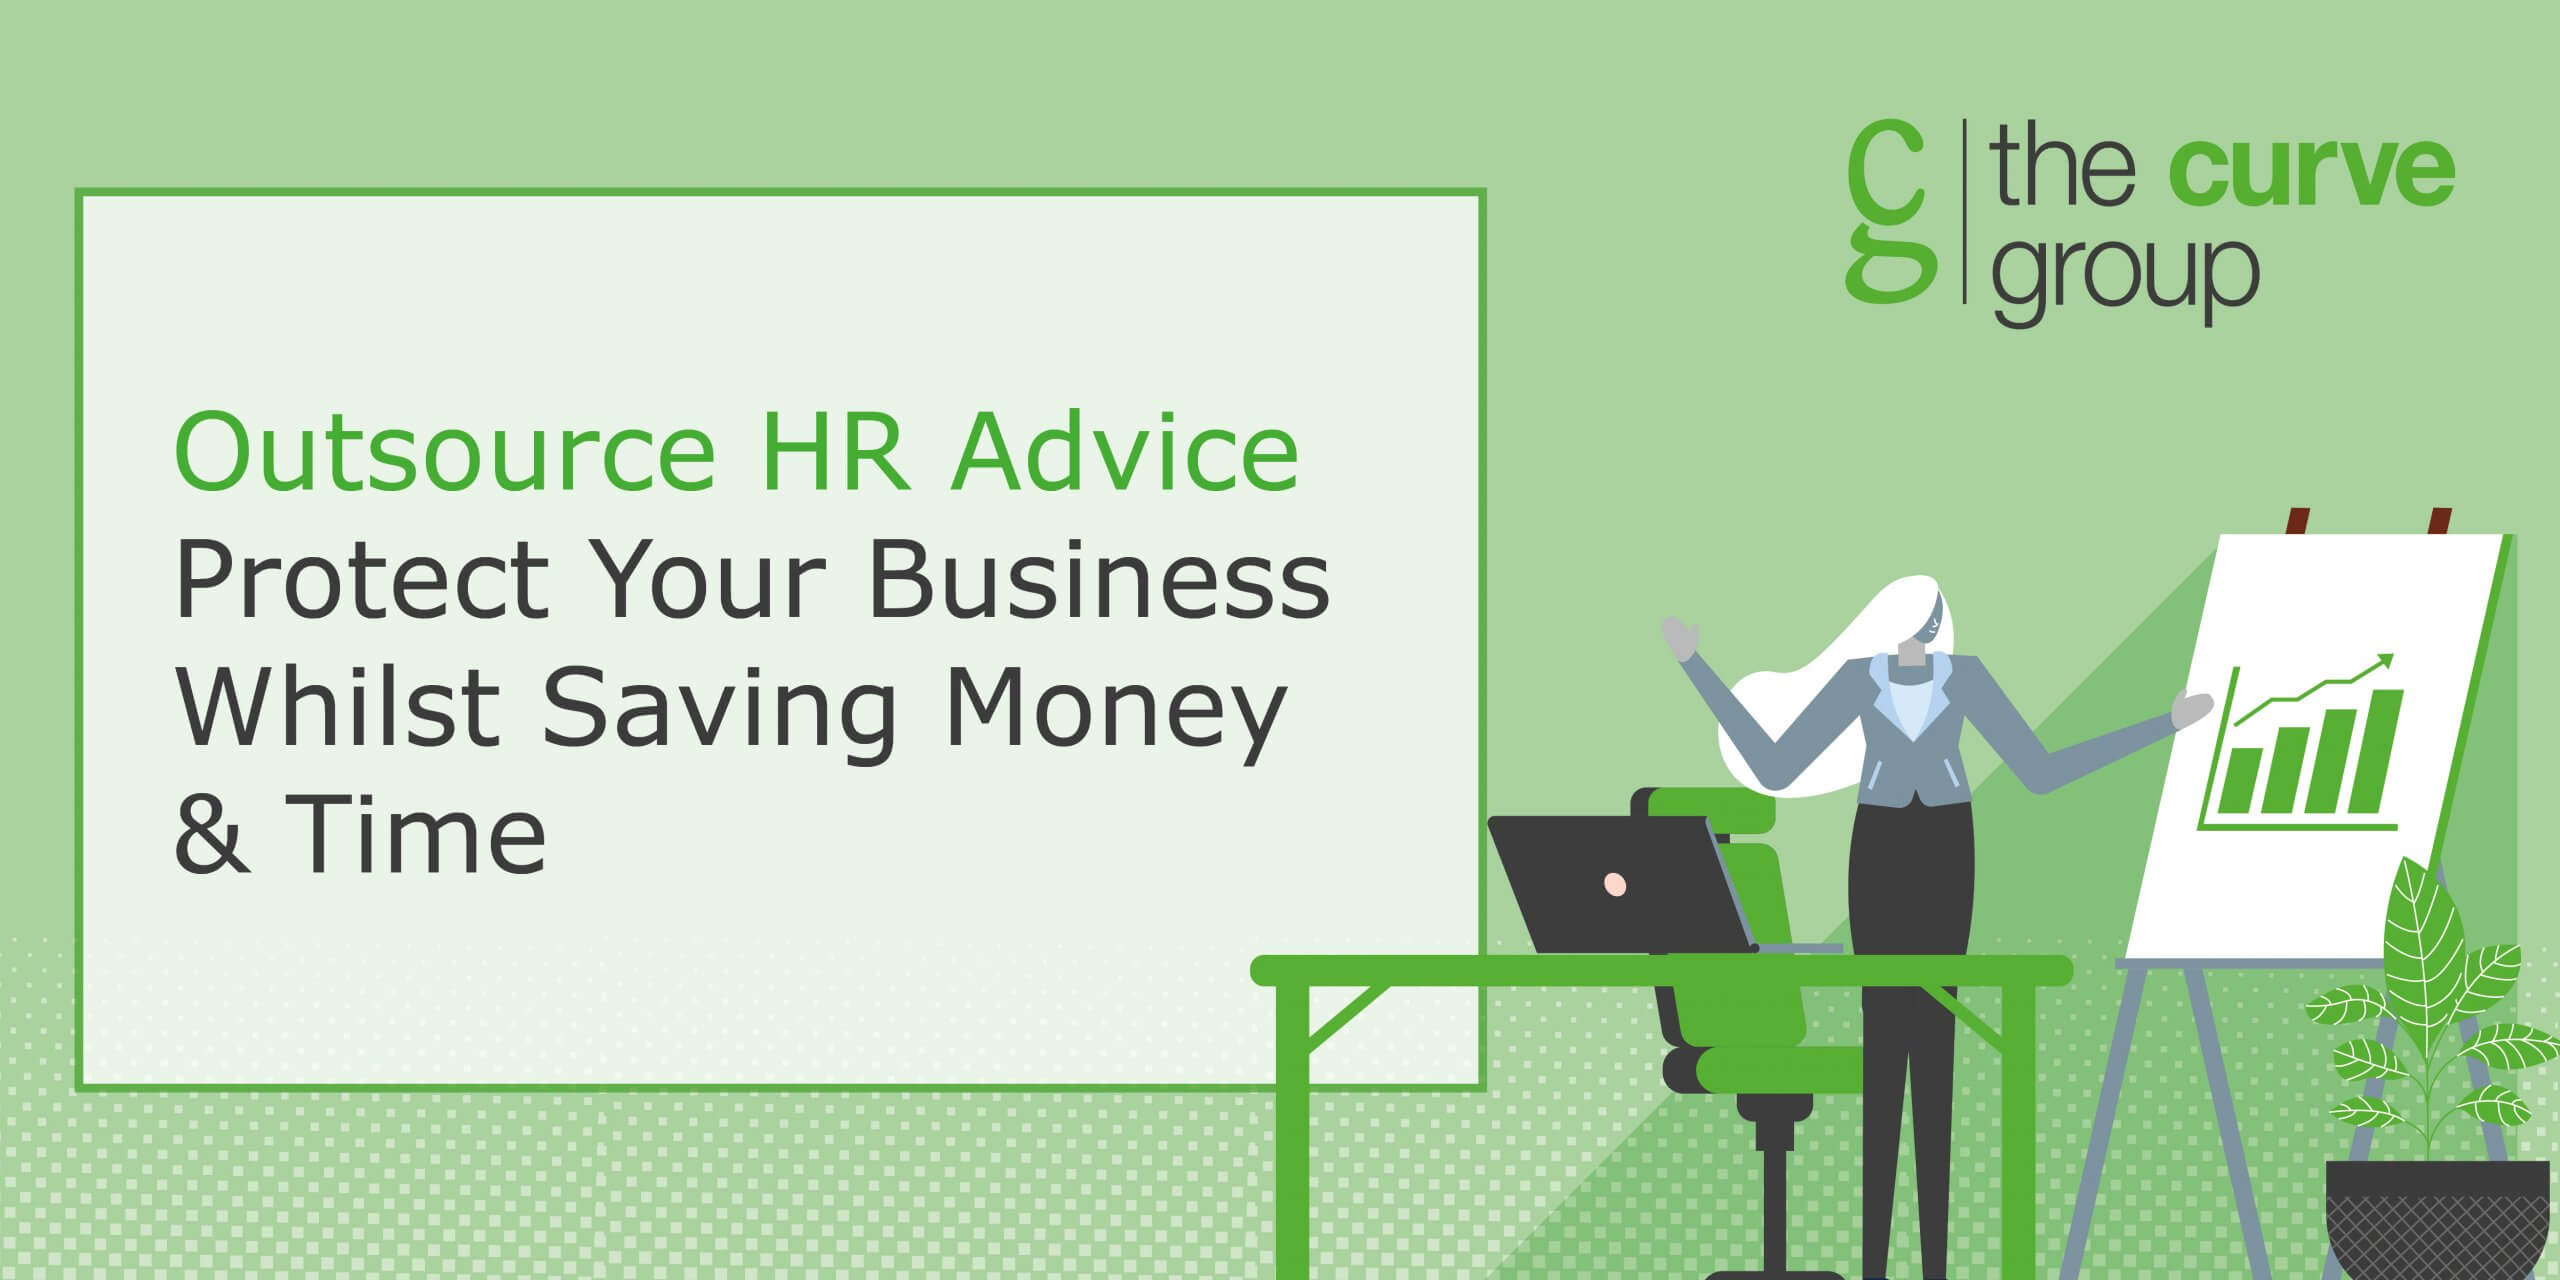 Business Case for Outsourcing HR Advice LInkedIn 1200 x 300px 1